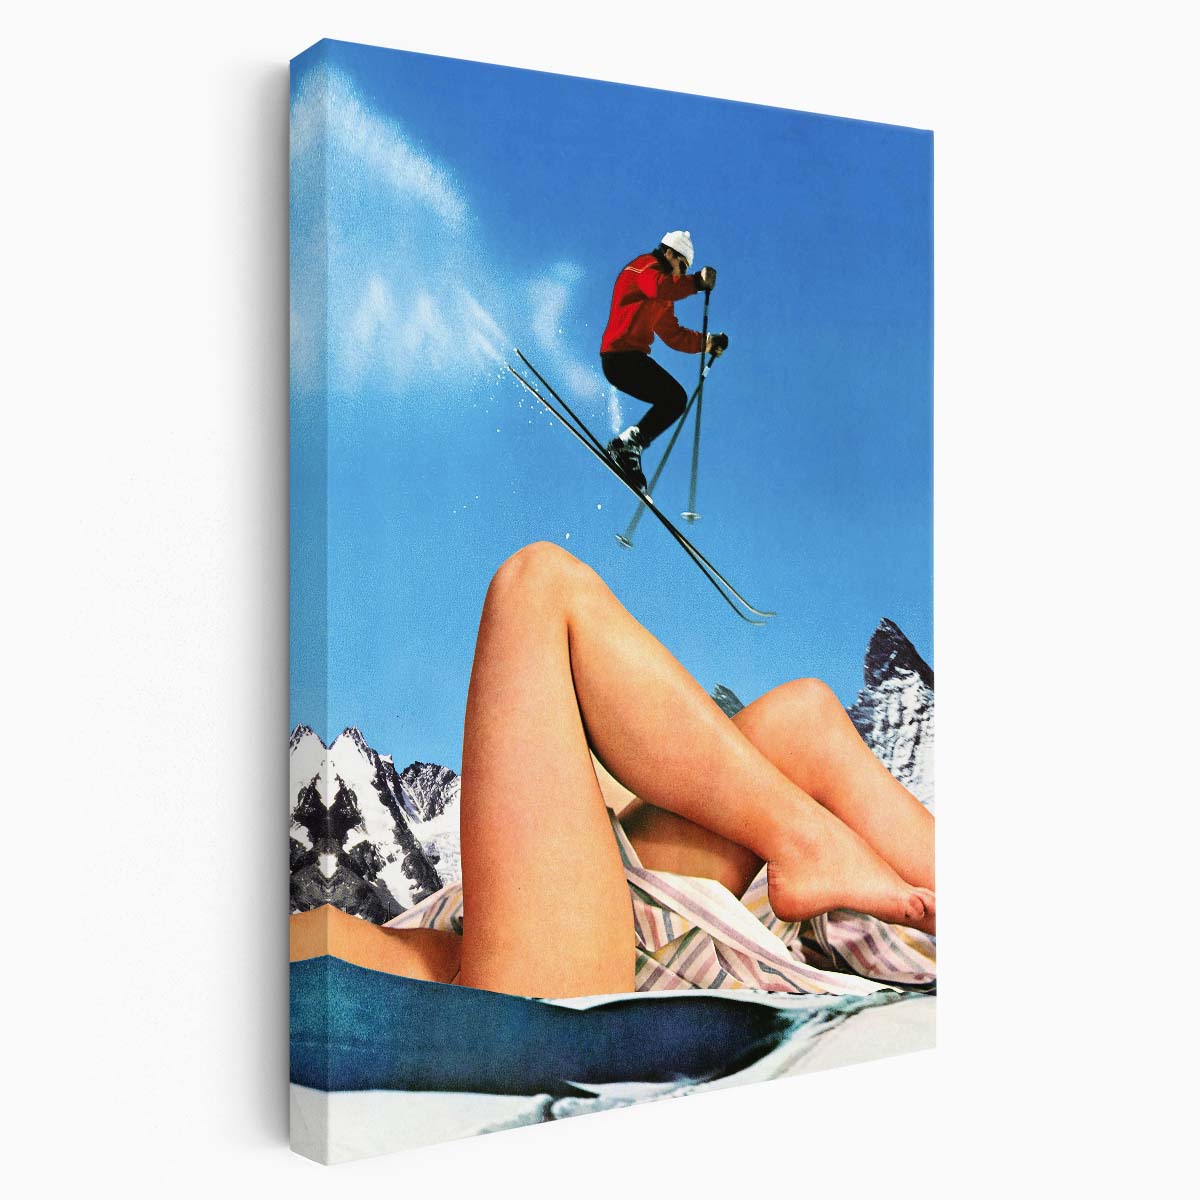 Vintage Winter Sports Collage Art, Funny Skiing Action by Taudalpoi by Luxuriance Designs, made in USA